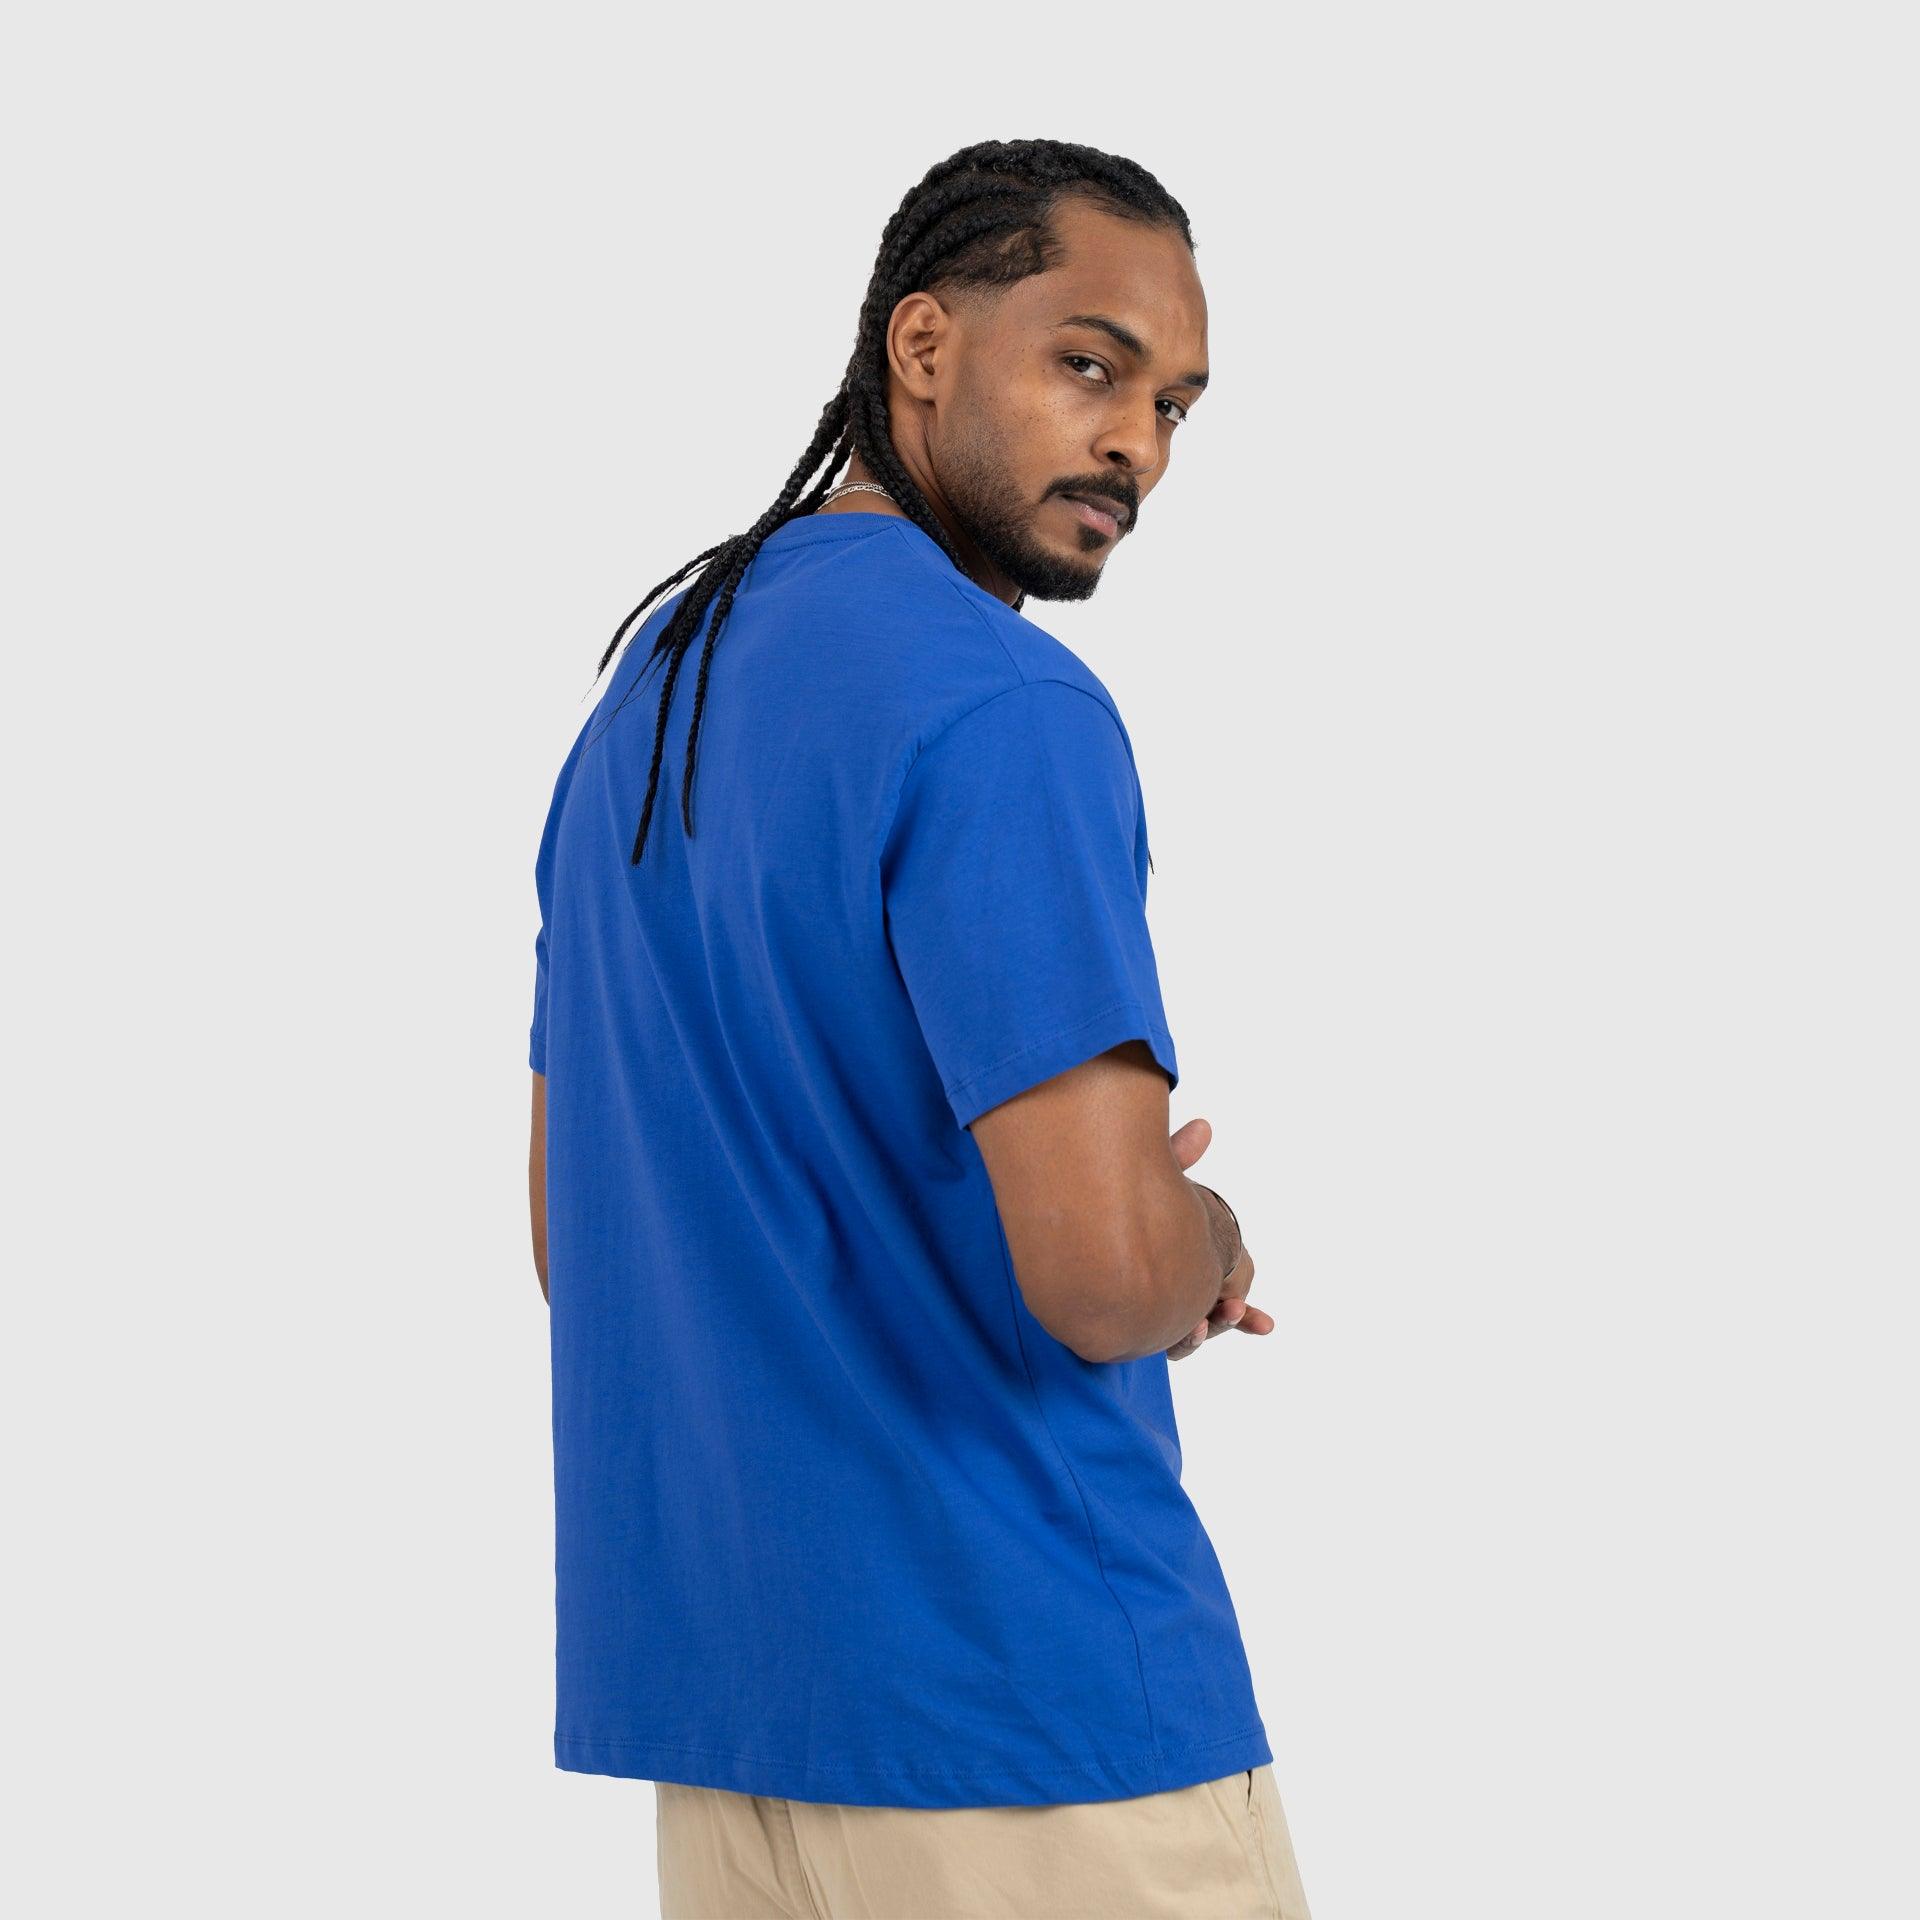 Blue Classic T-Shirt From Weaver Design - WECRE8